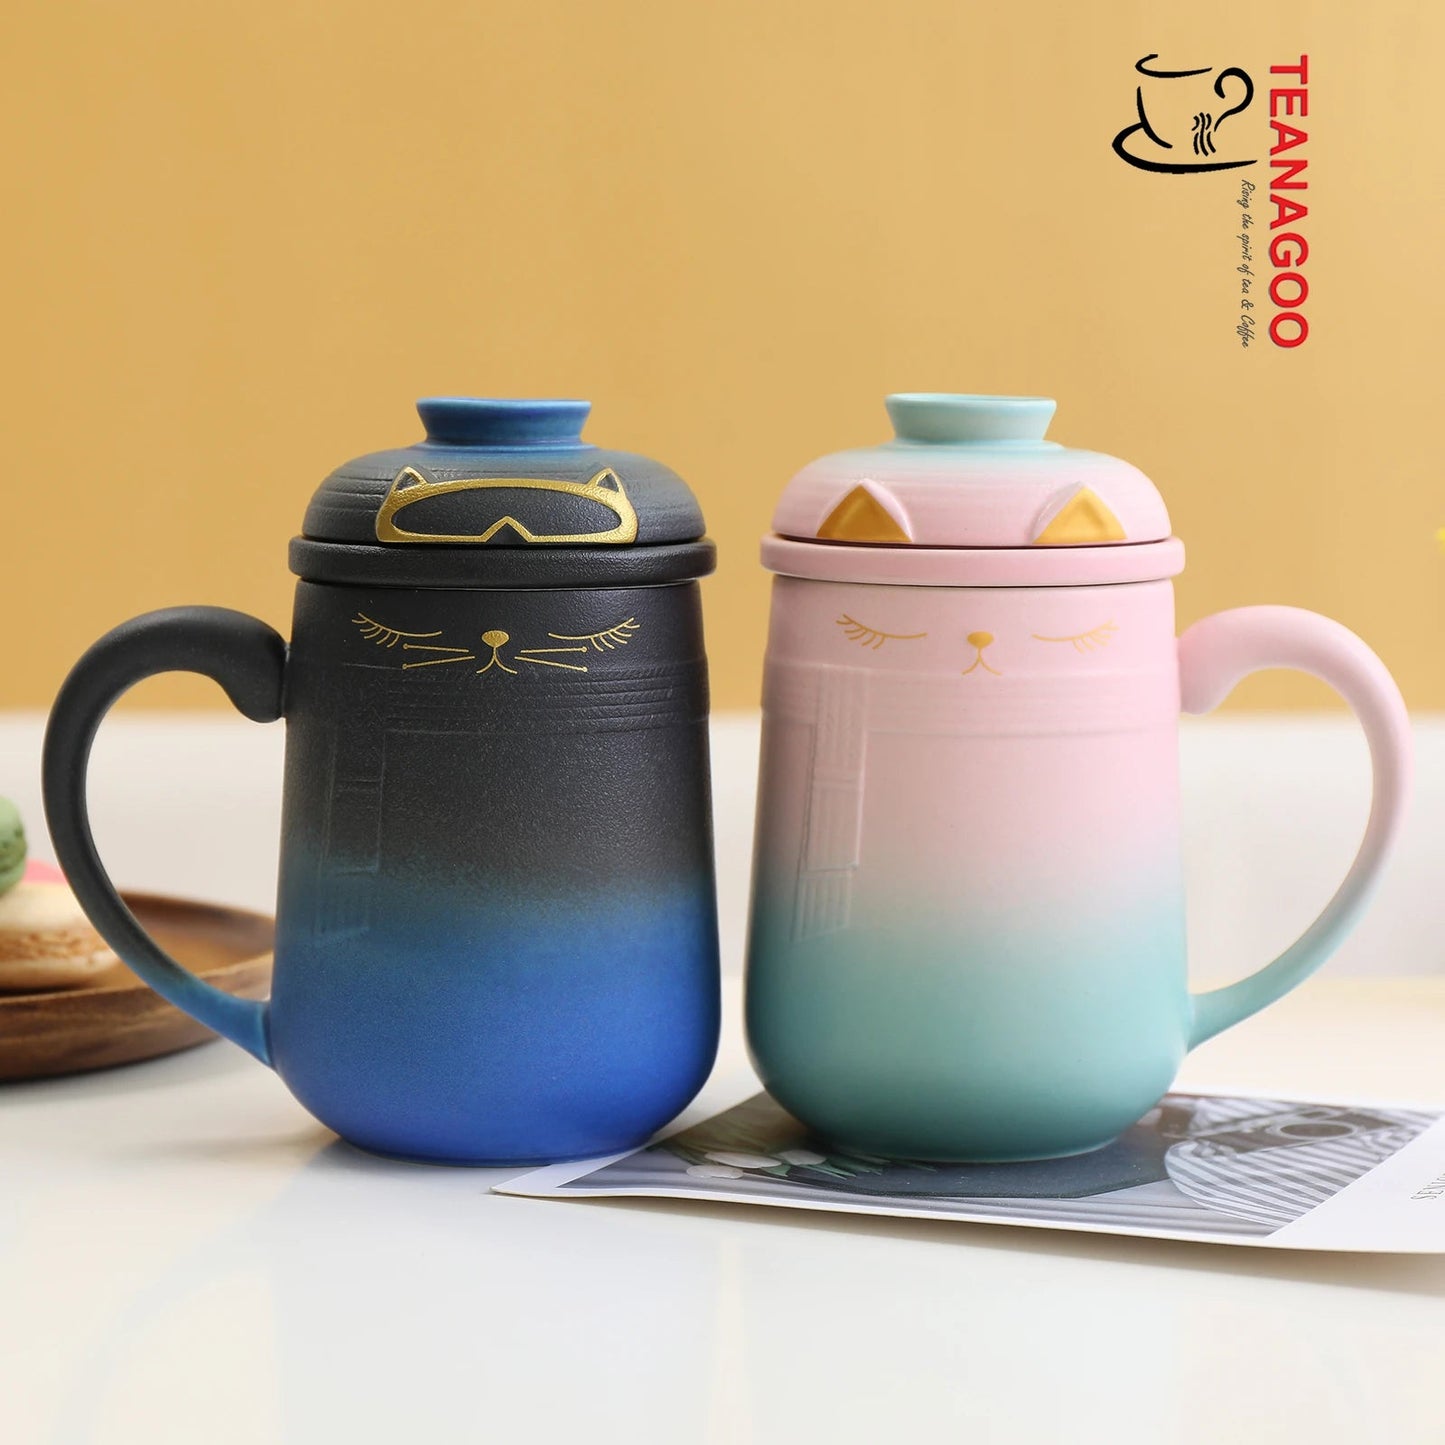 Ceramic Lovely Cat Tea Mug with Infuser & Lid & Color Box Packing